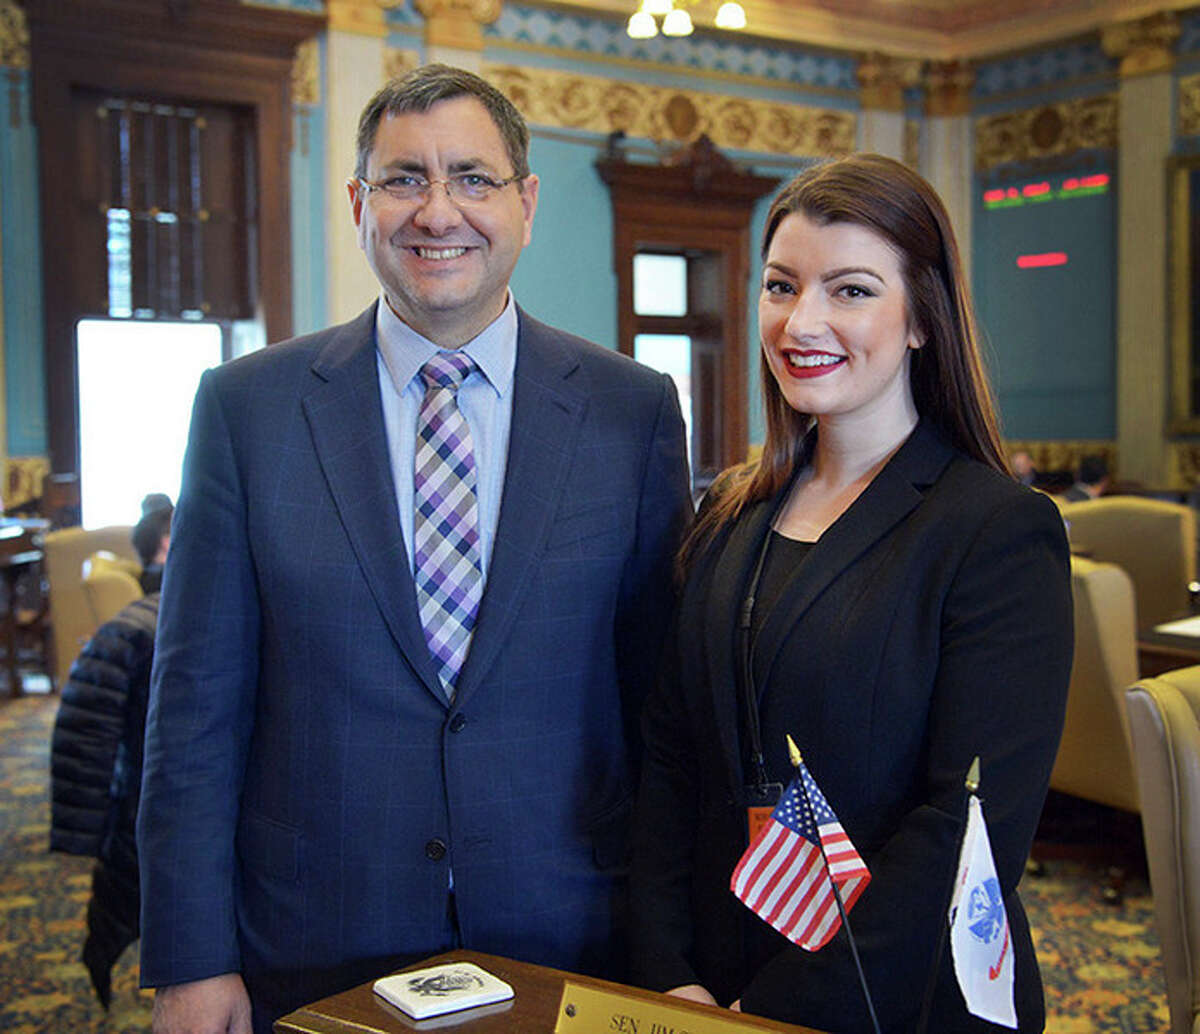 State Sen. Jim Stamas, left, with Shelby Avery, of Midland, after Stamas underwent bariatric surgery and lost nearly 100 pounds.